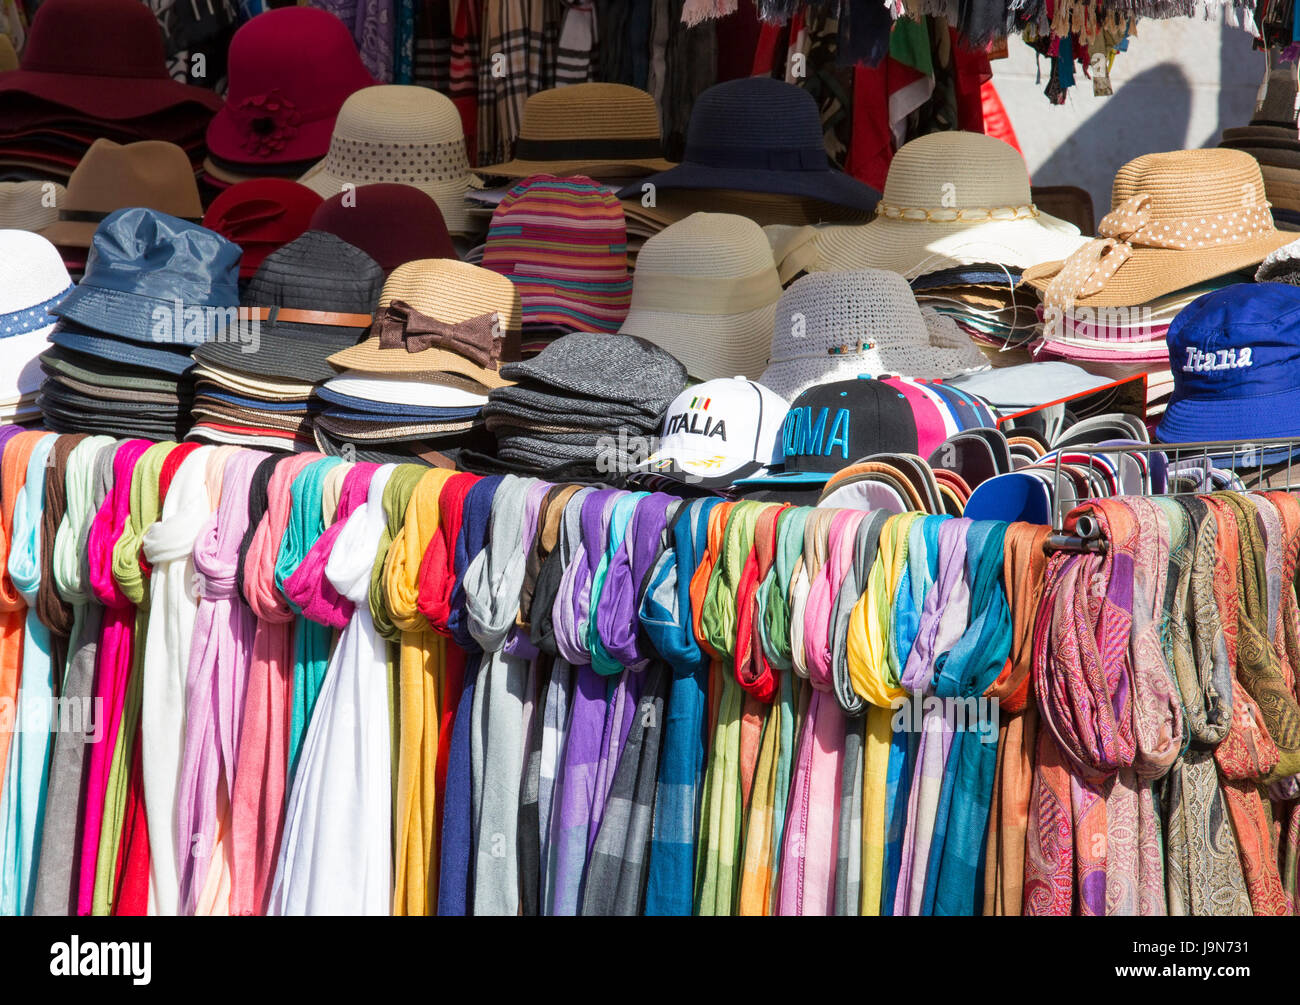 Hats for sale in Vatican City, Europe Stock Photo